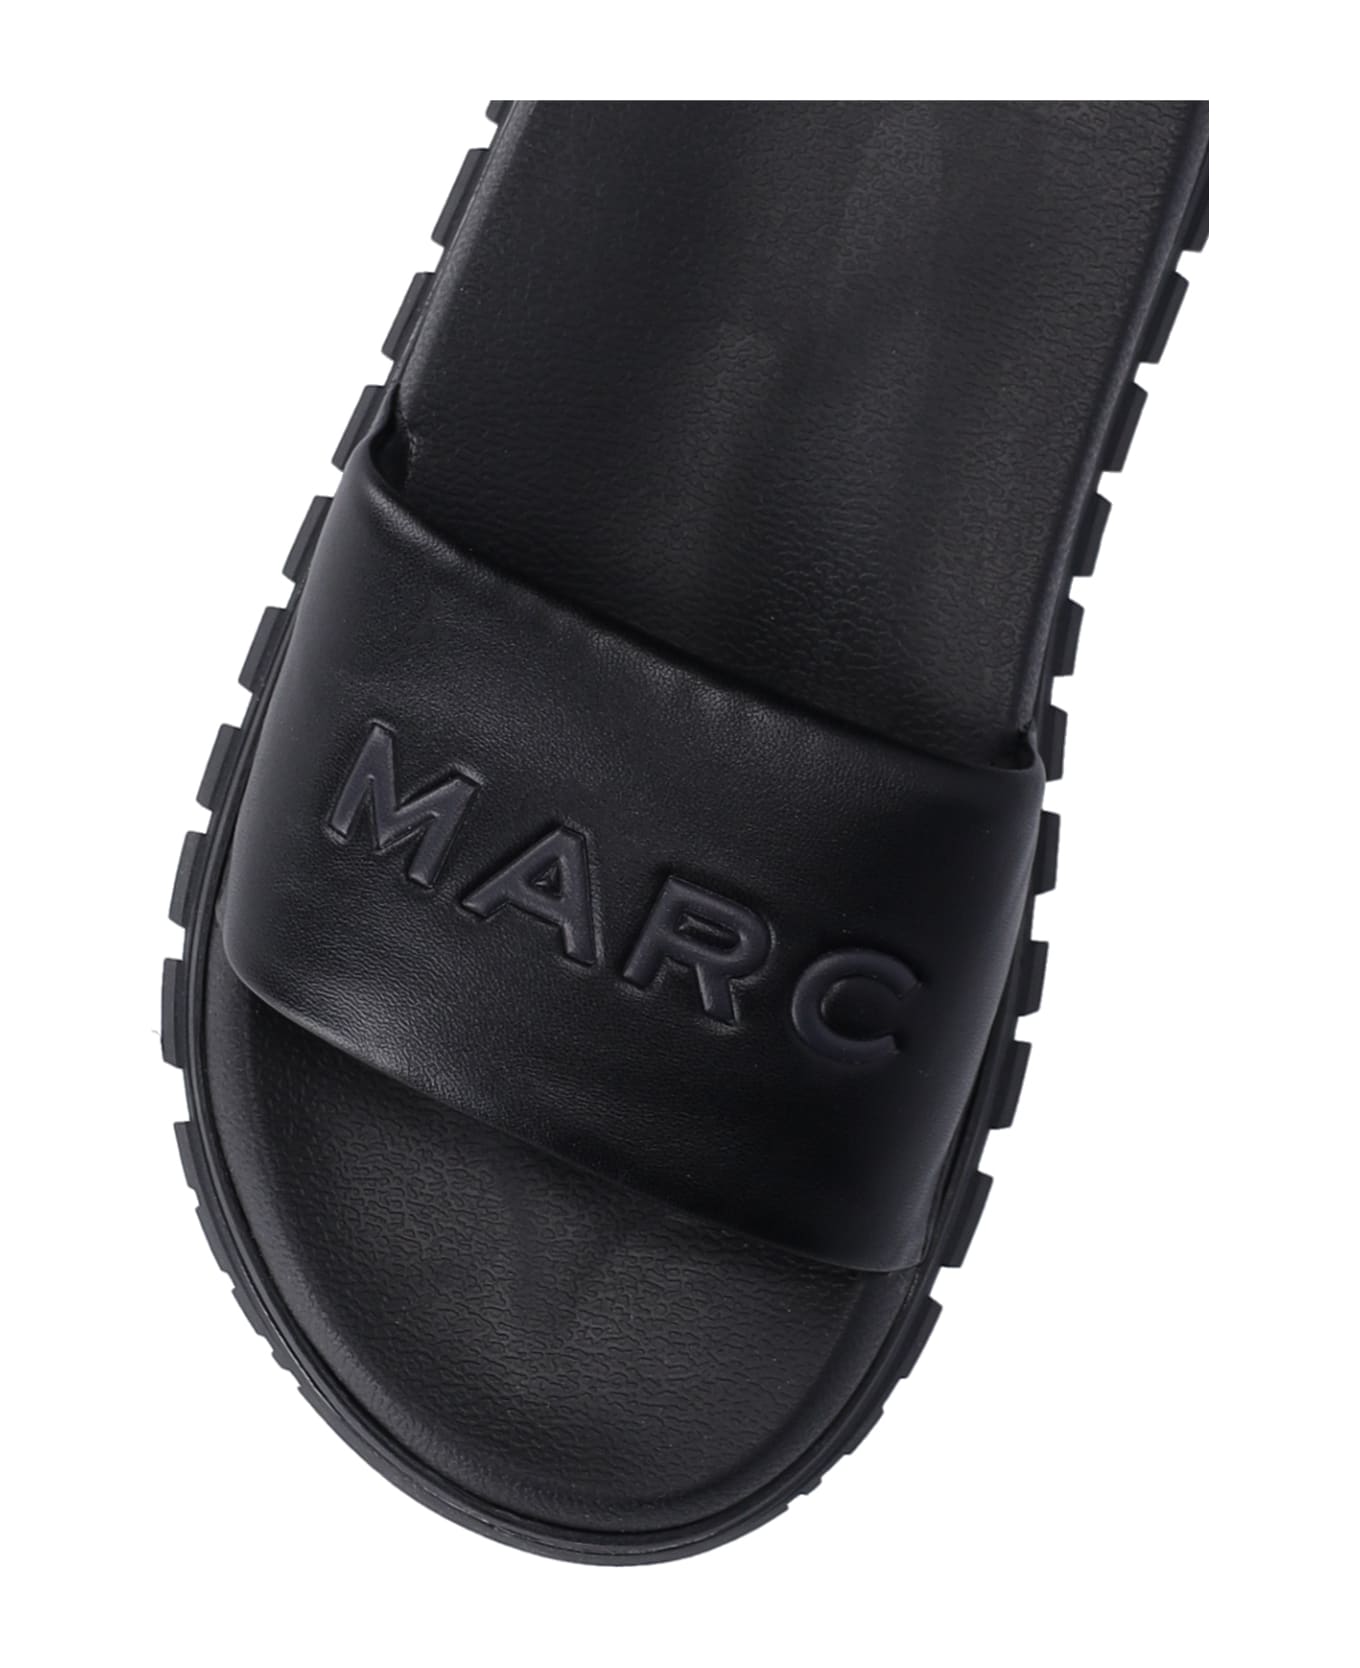 Marc Jacobs Slide Sandals 'the Leather' - Black サンダル